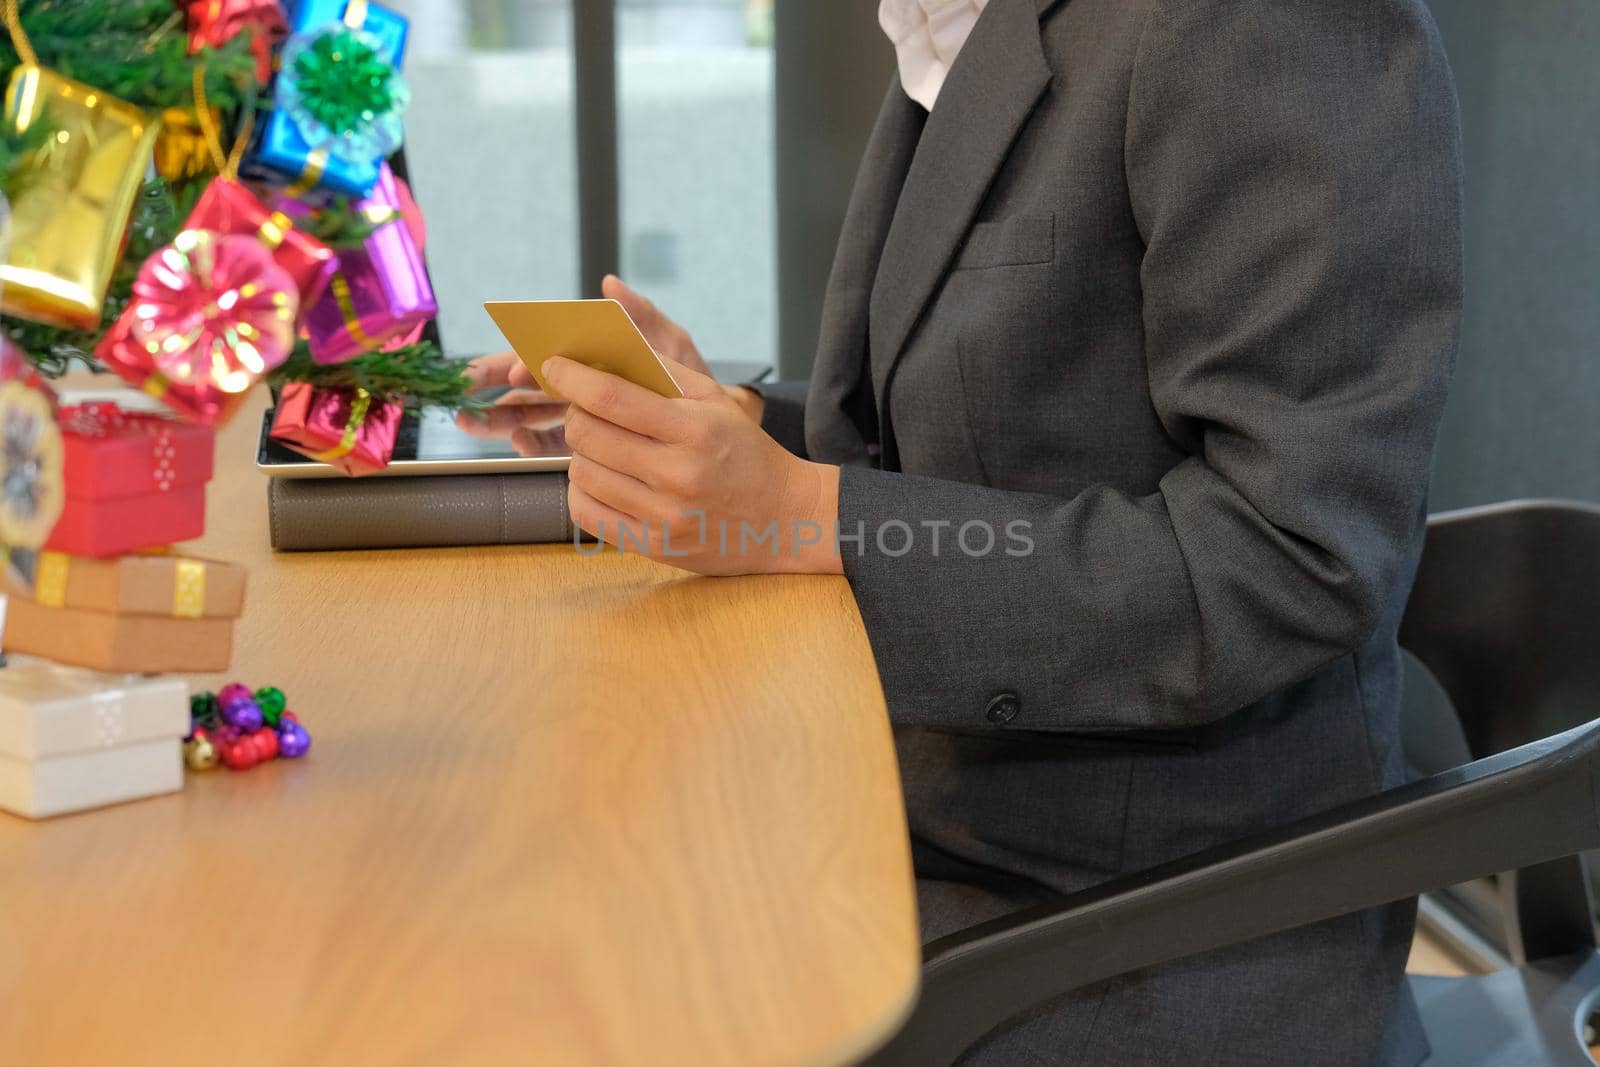 woman holding credit card using tablet for online shopping. businesswoman buying on internet during christmas holiday by pp99